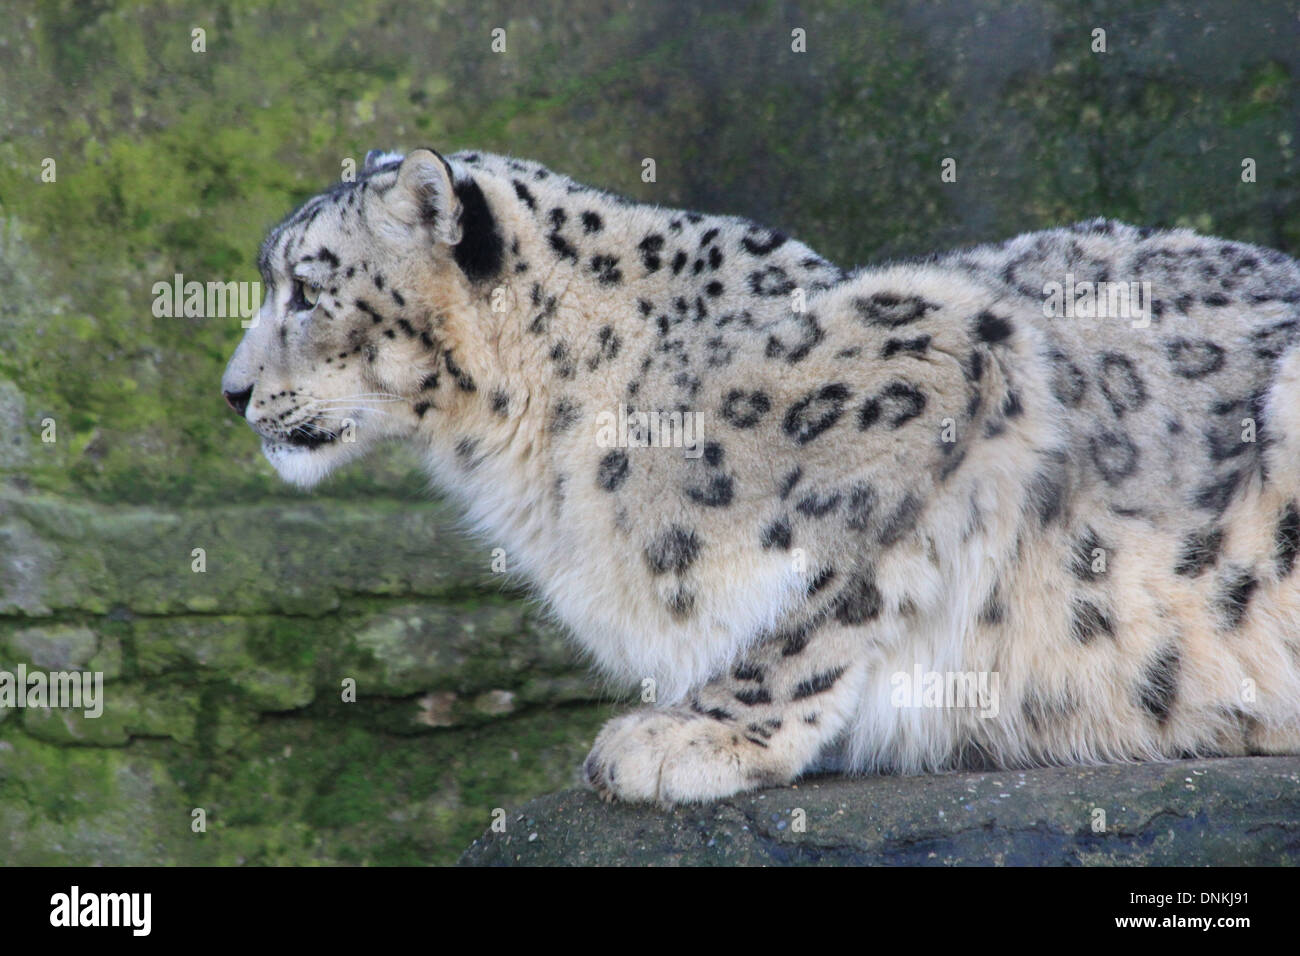 A close up photograph of a leopard sitting alert. Stock Photo